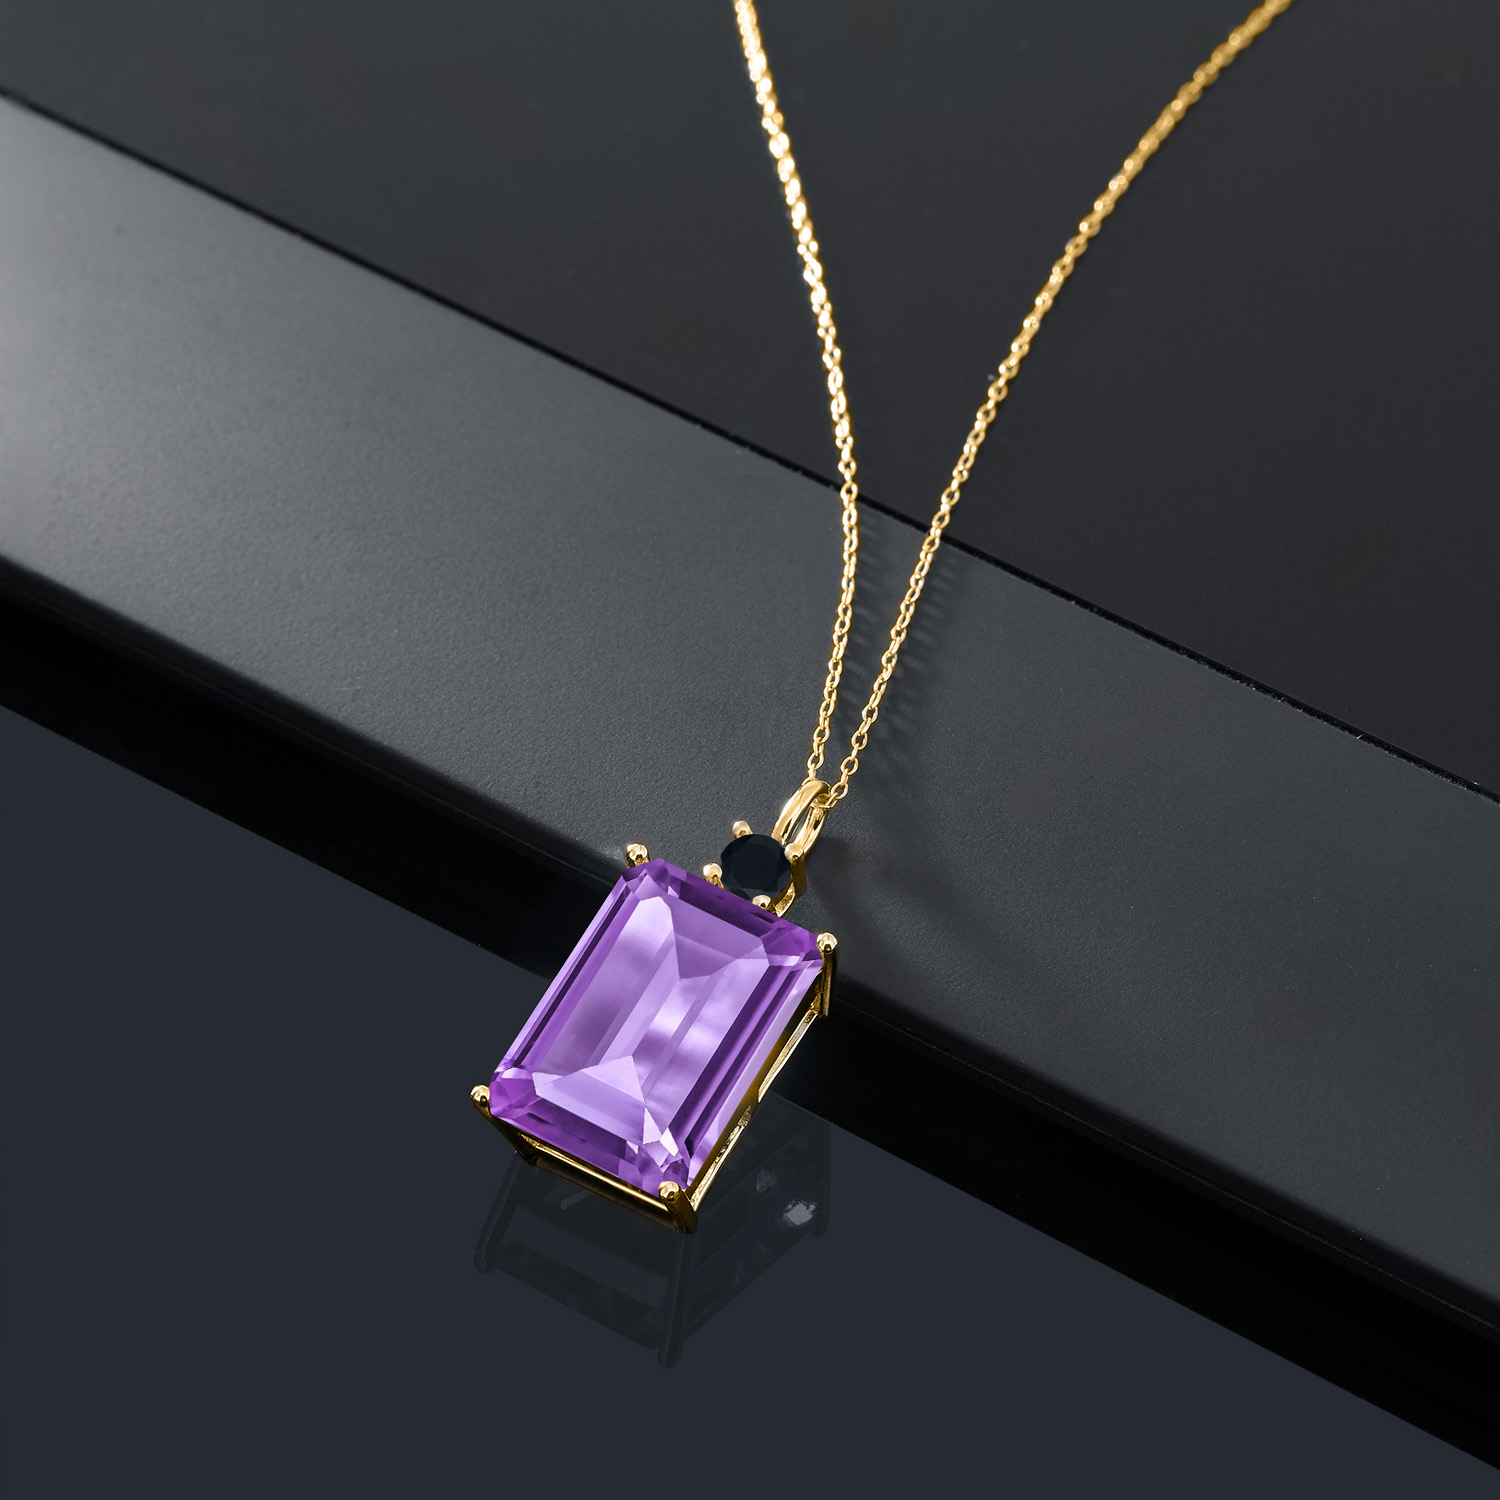 Gem Stone King 15.22 Ct Purple Amethyst Black Onyx 18K Yellow Gold Plated Silver Pendant with Chain